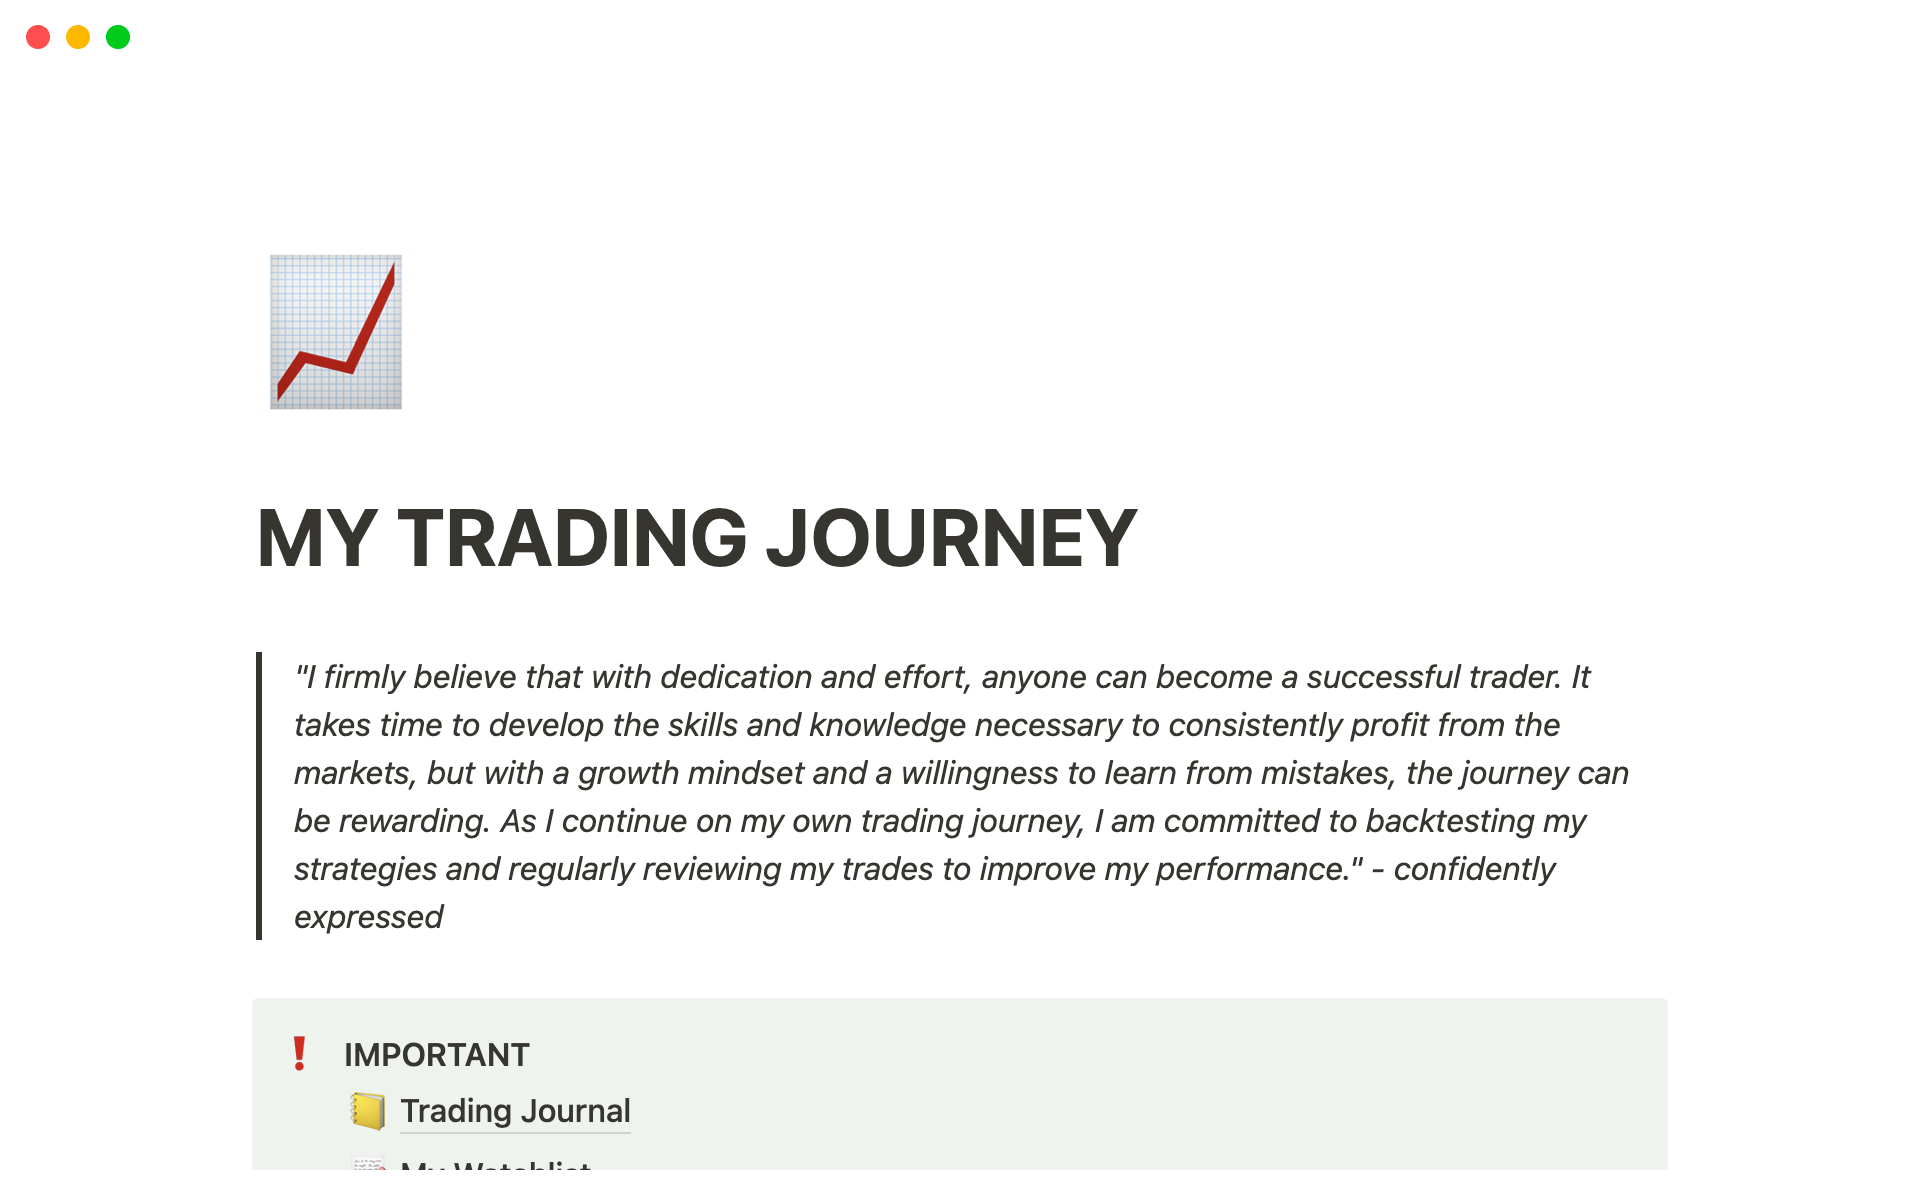 Help new traders develop trading consistency and discipline